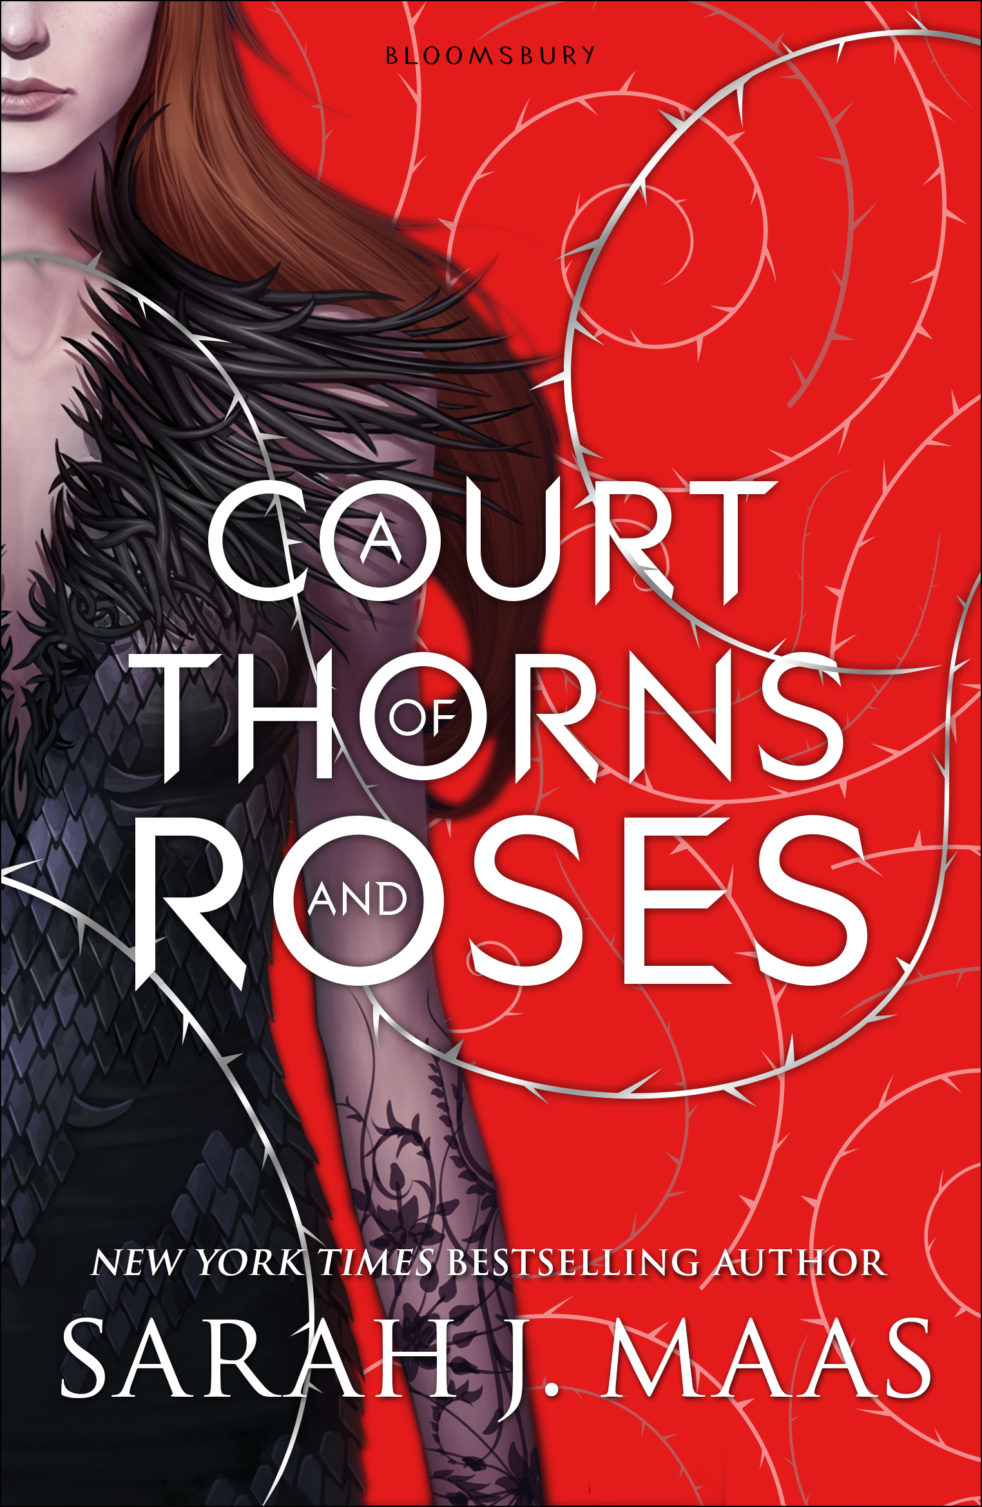 court thorn roses